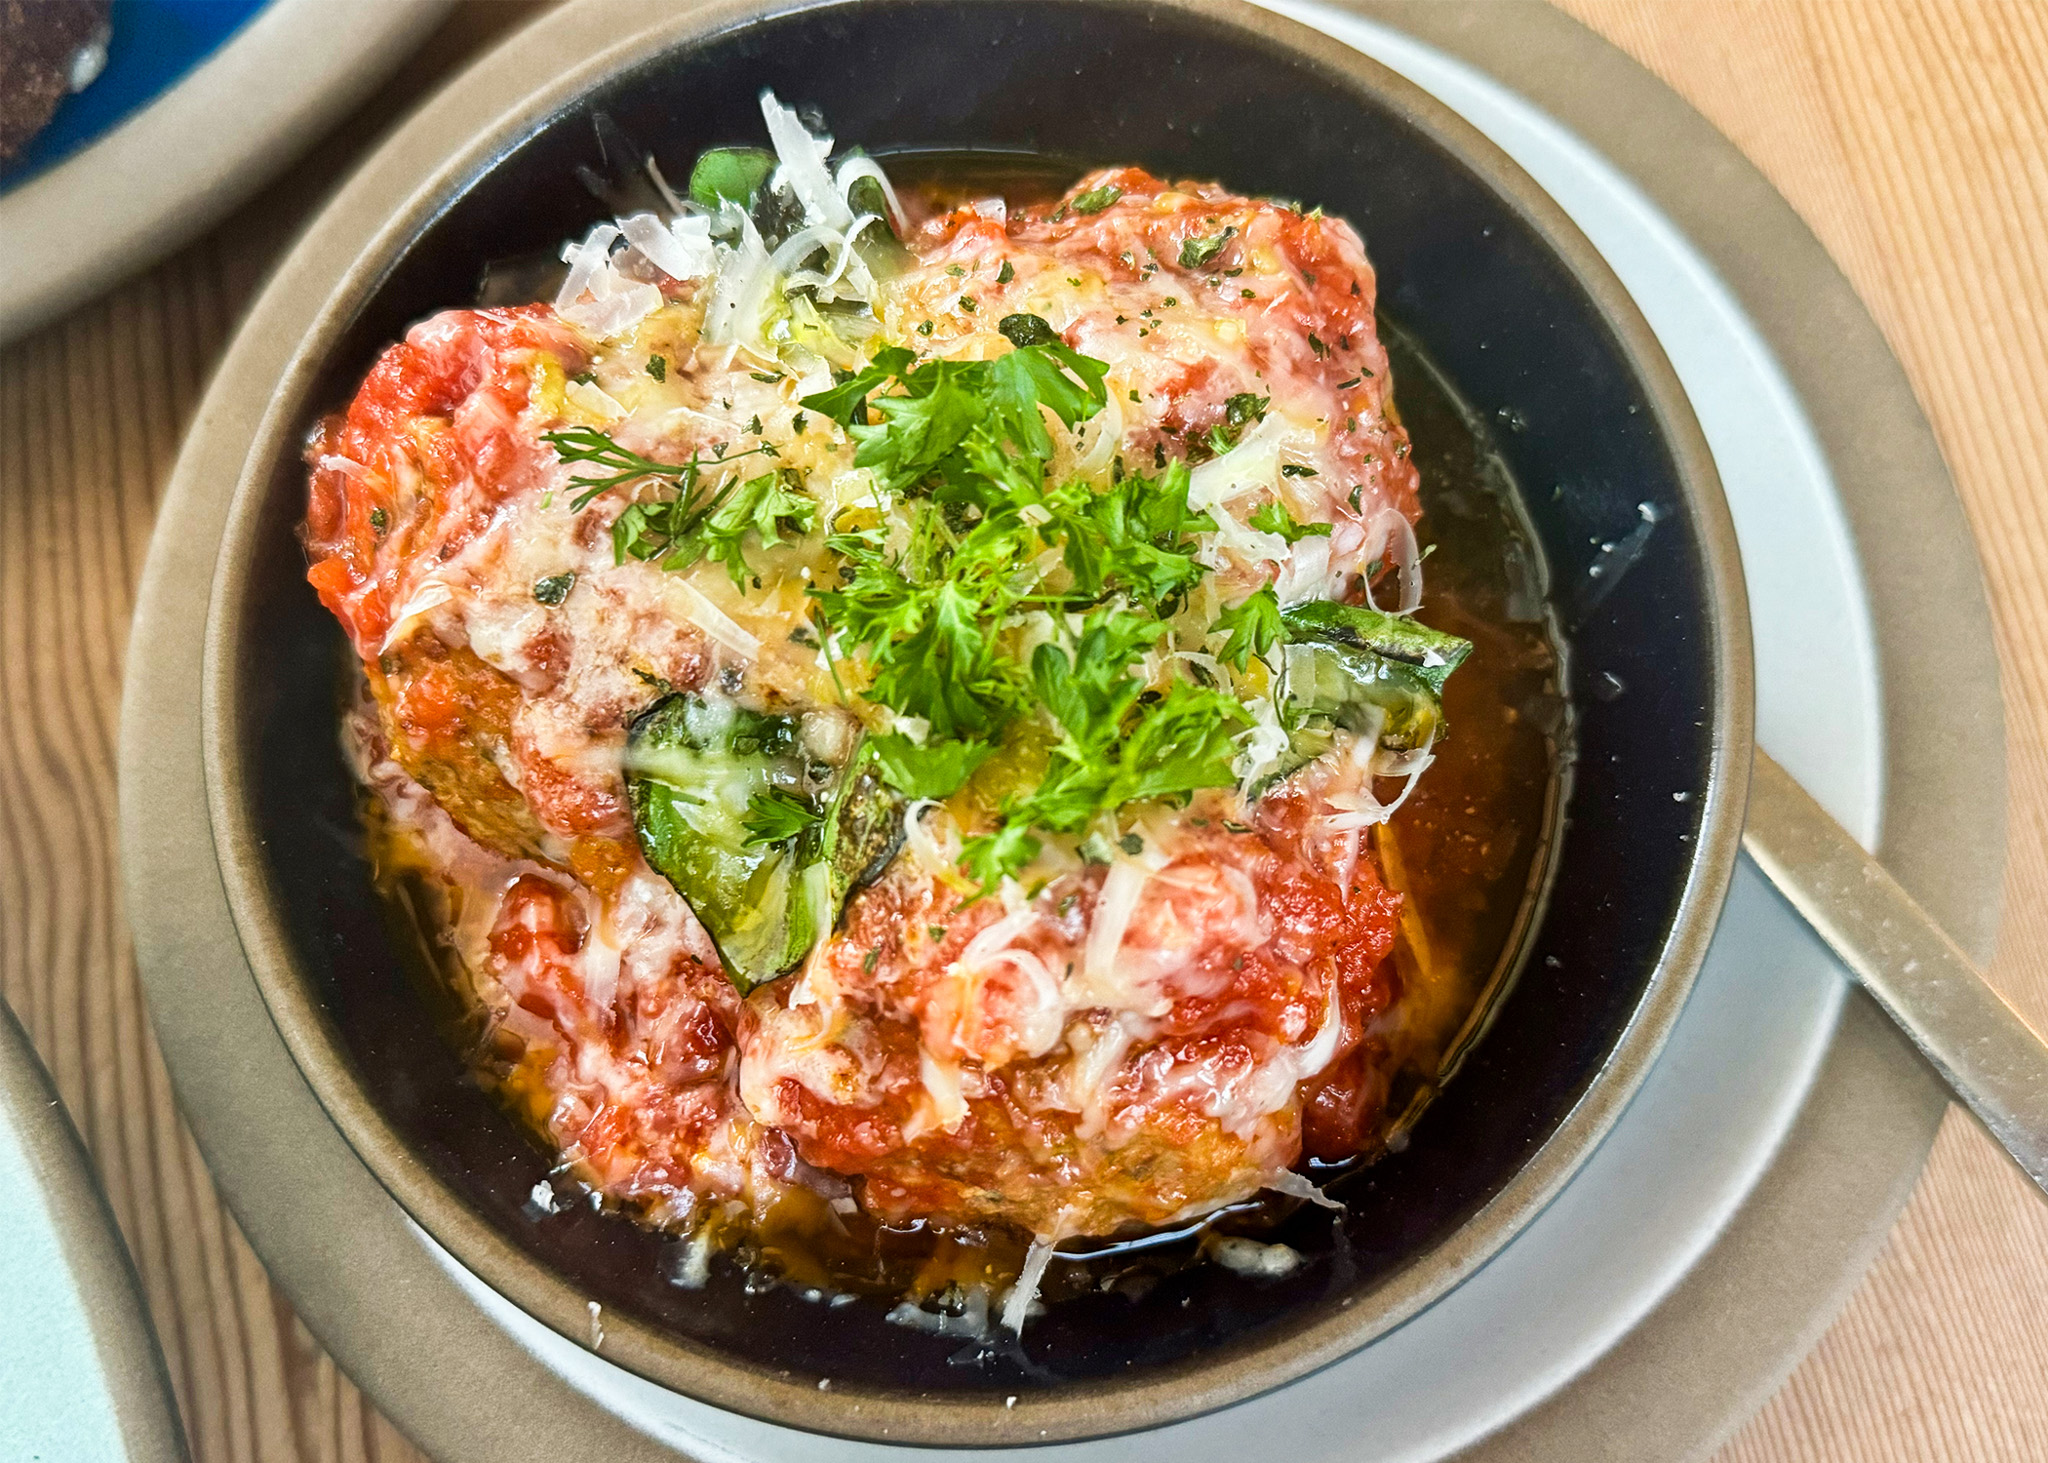 A baked dish topped with cheese and herbs, in tomato sauce, presented in a round bowl with a fork.